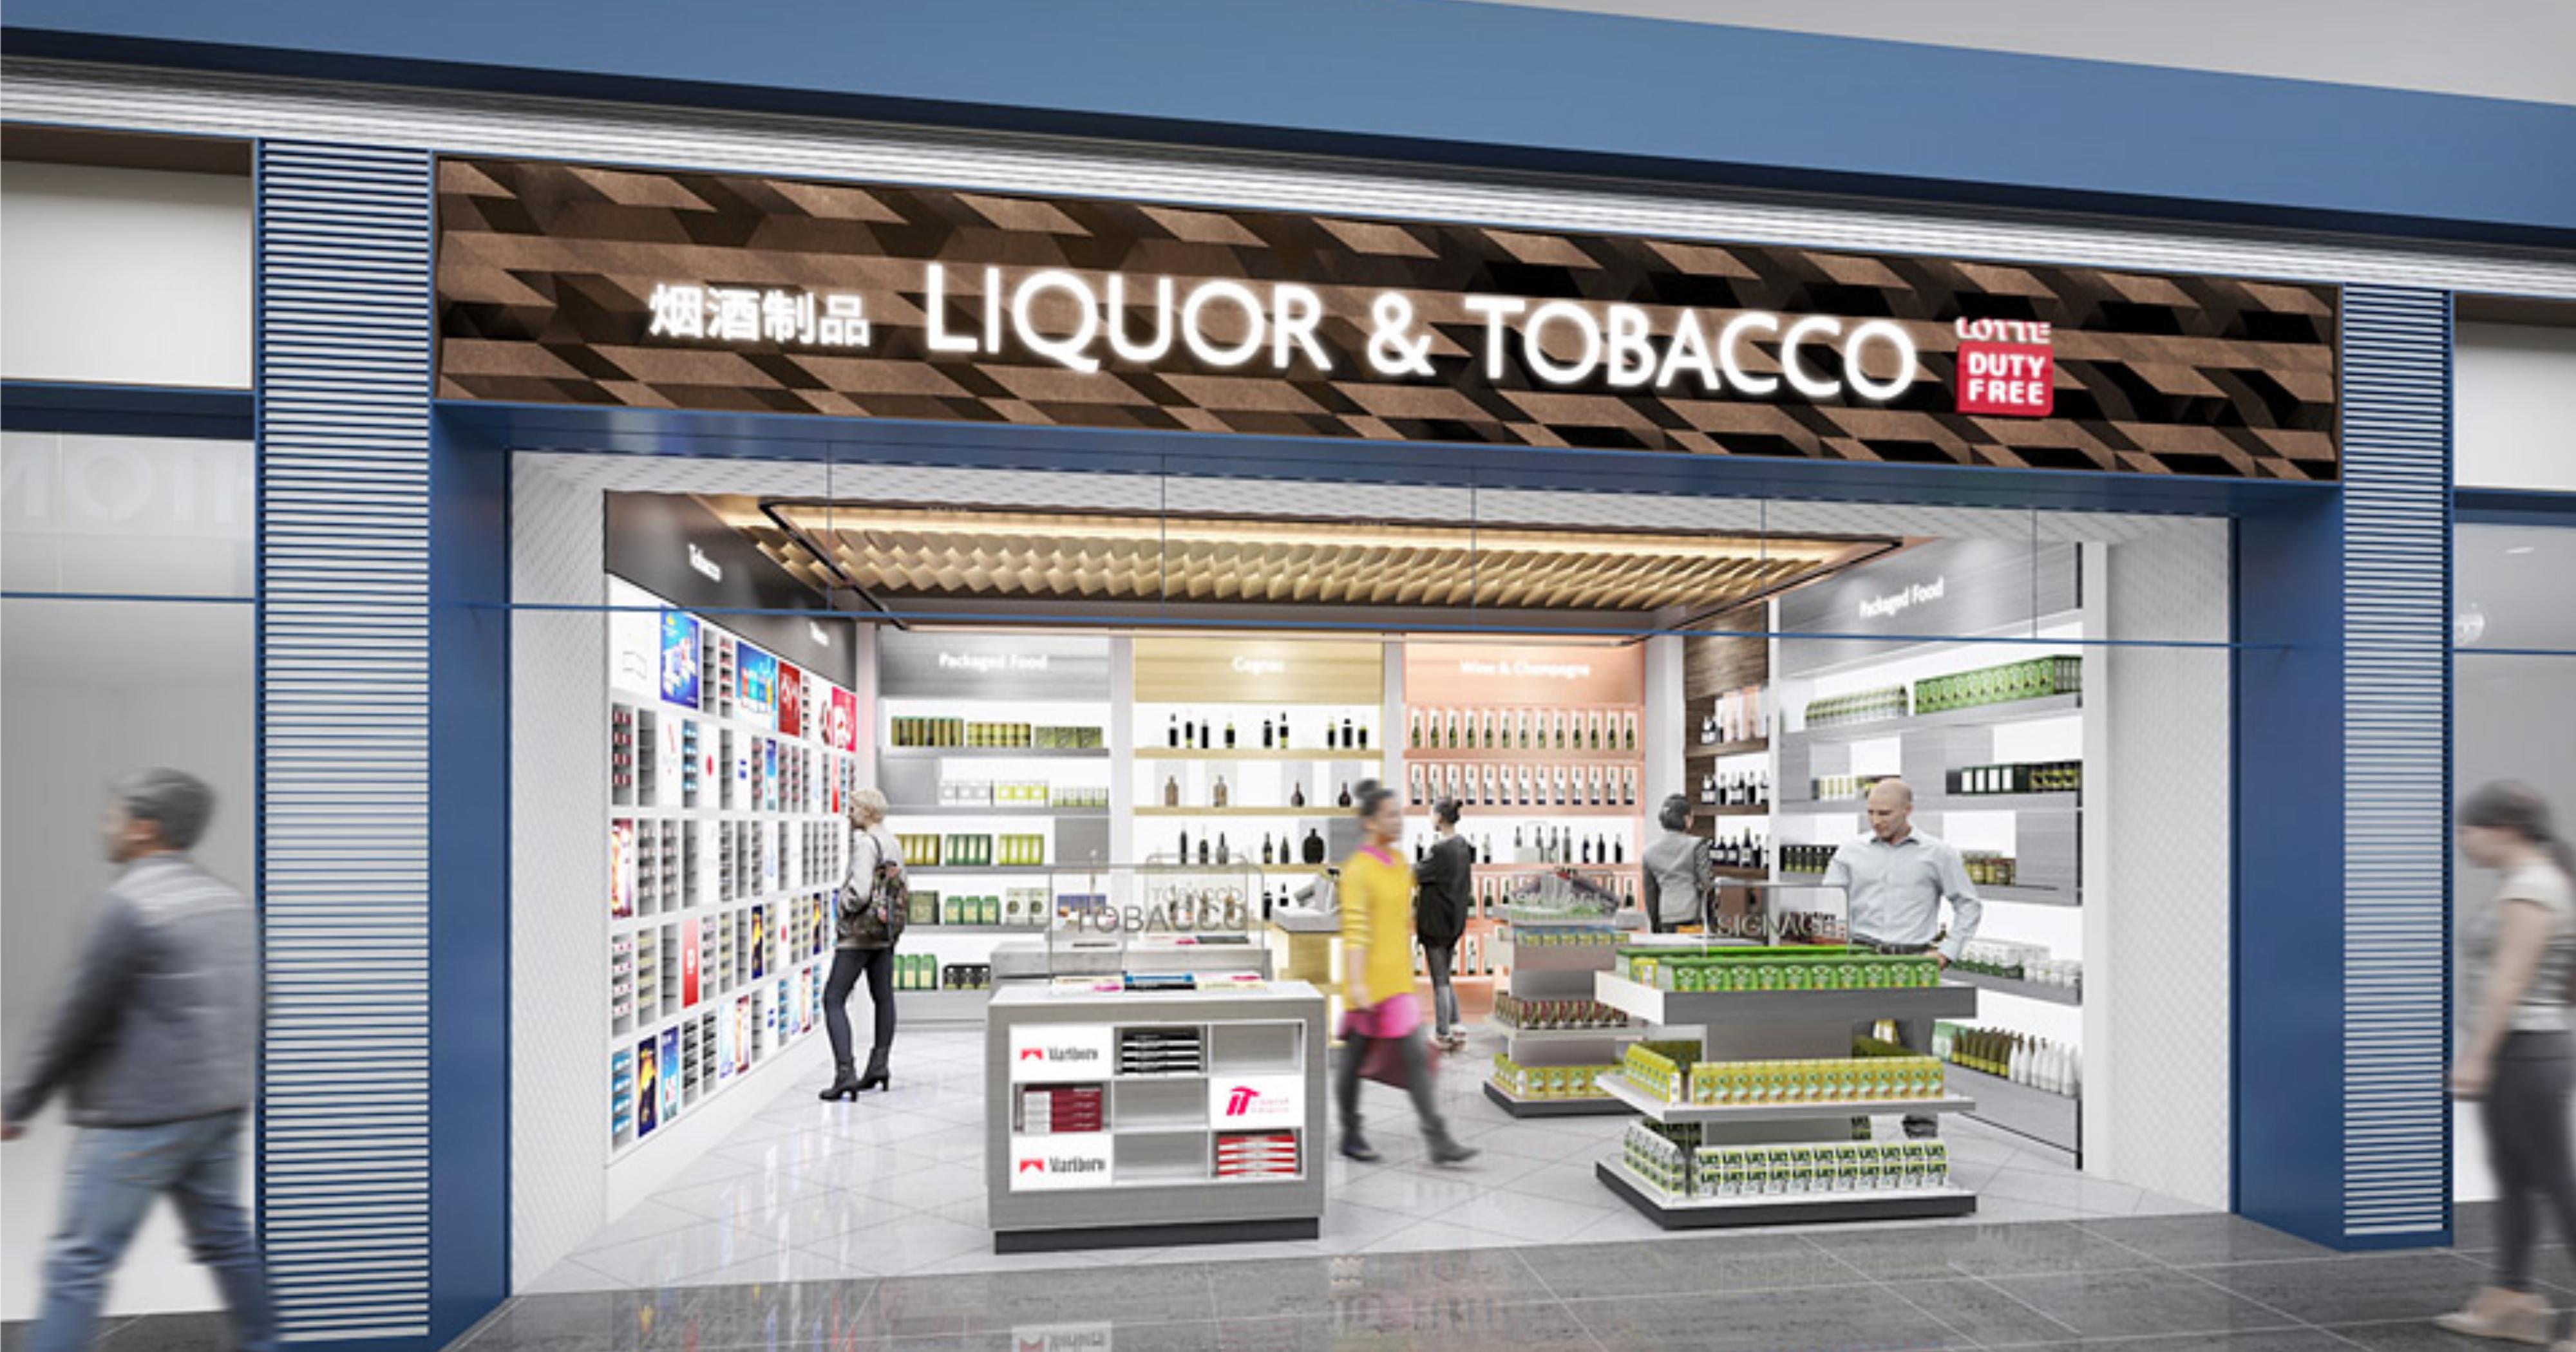 DFS tobacco and liquor stores to depart Changi Airport in 2020